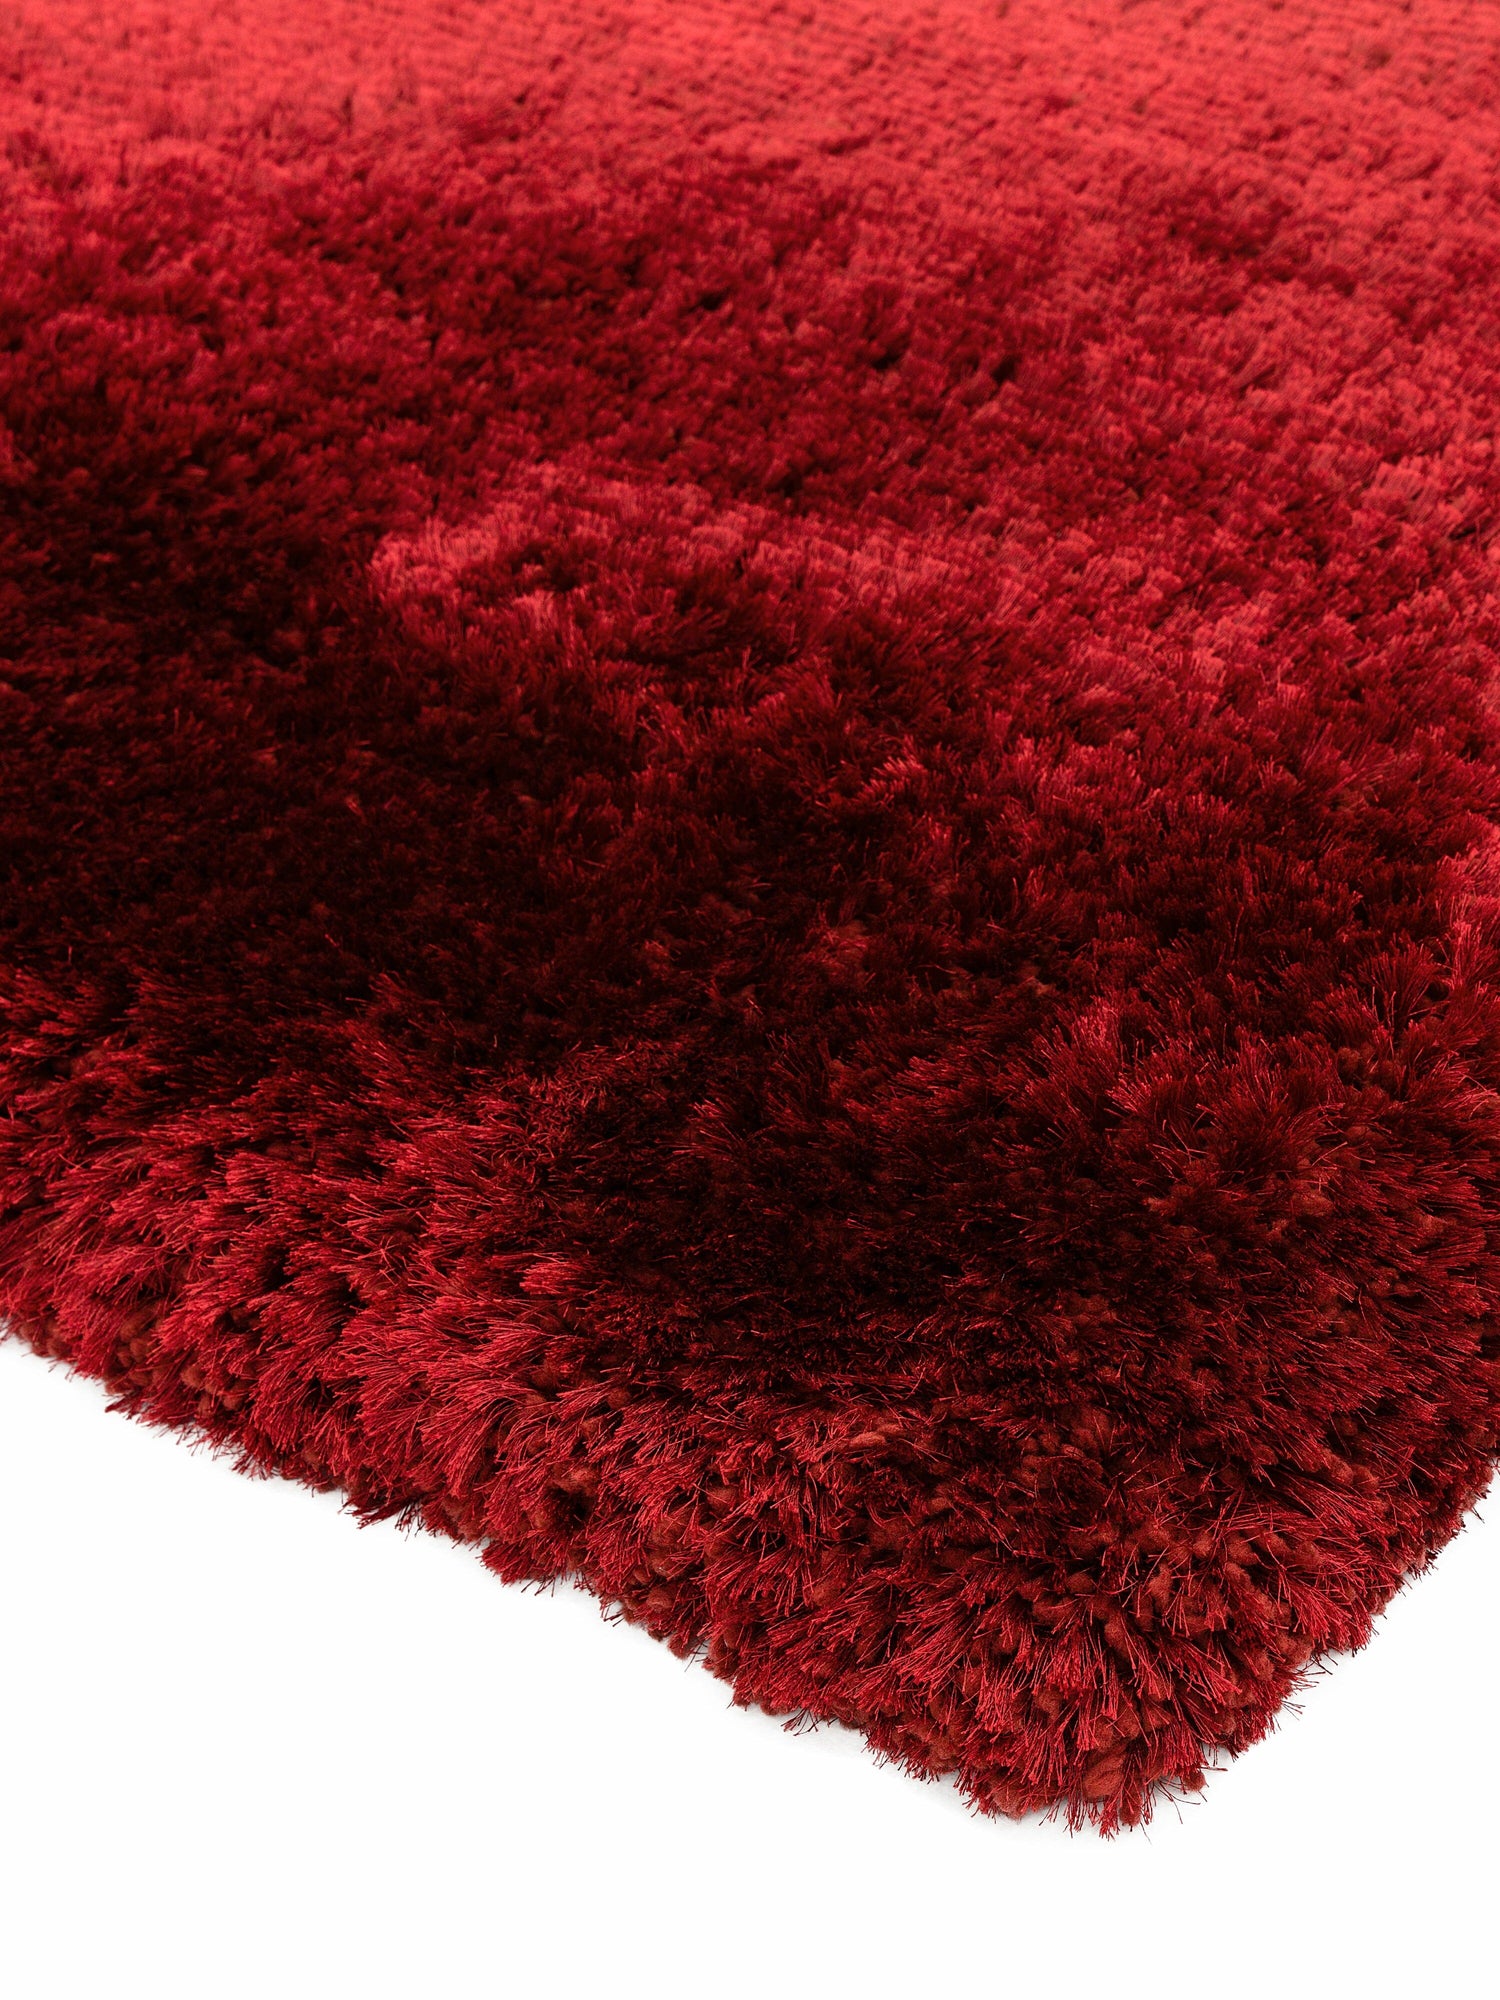  Asiatic Carpets-Asiatic Carpets Plush Hand Woven Rug Red - 160 x 230cm-Red 013 